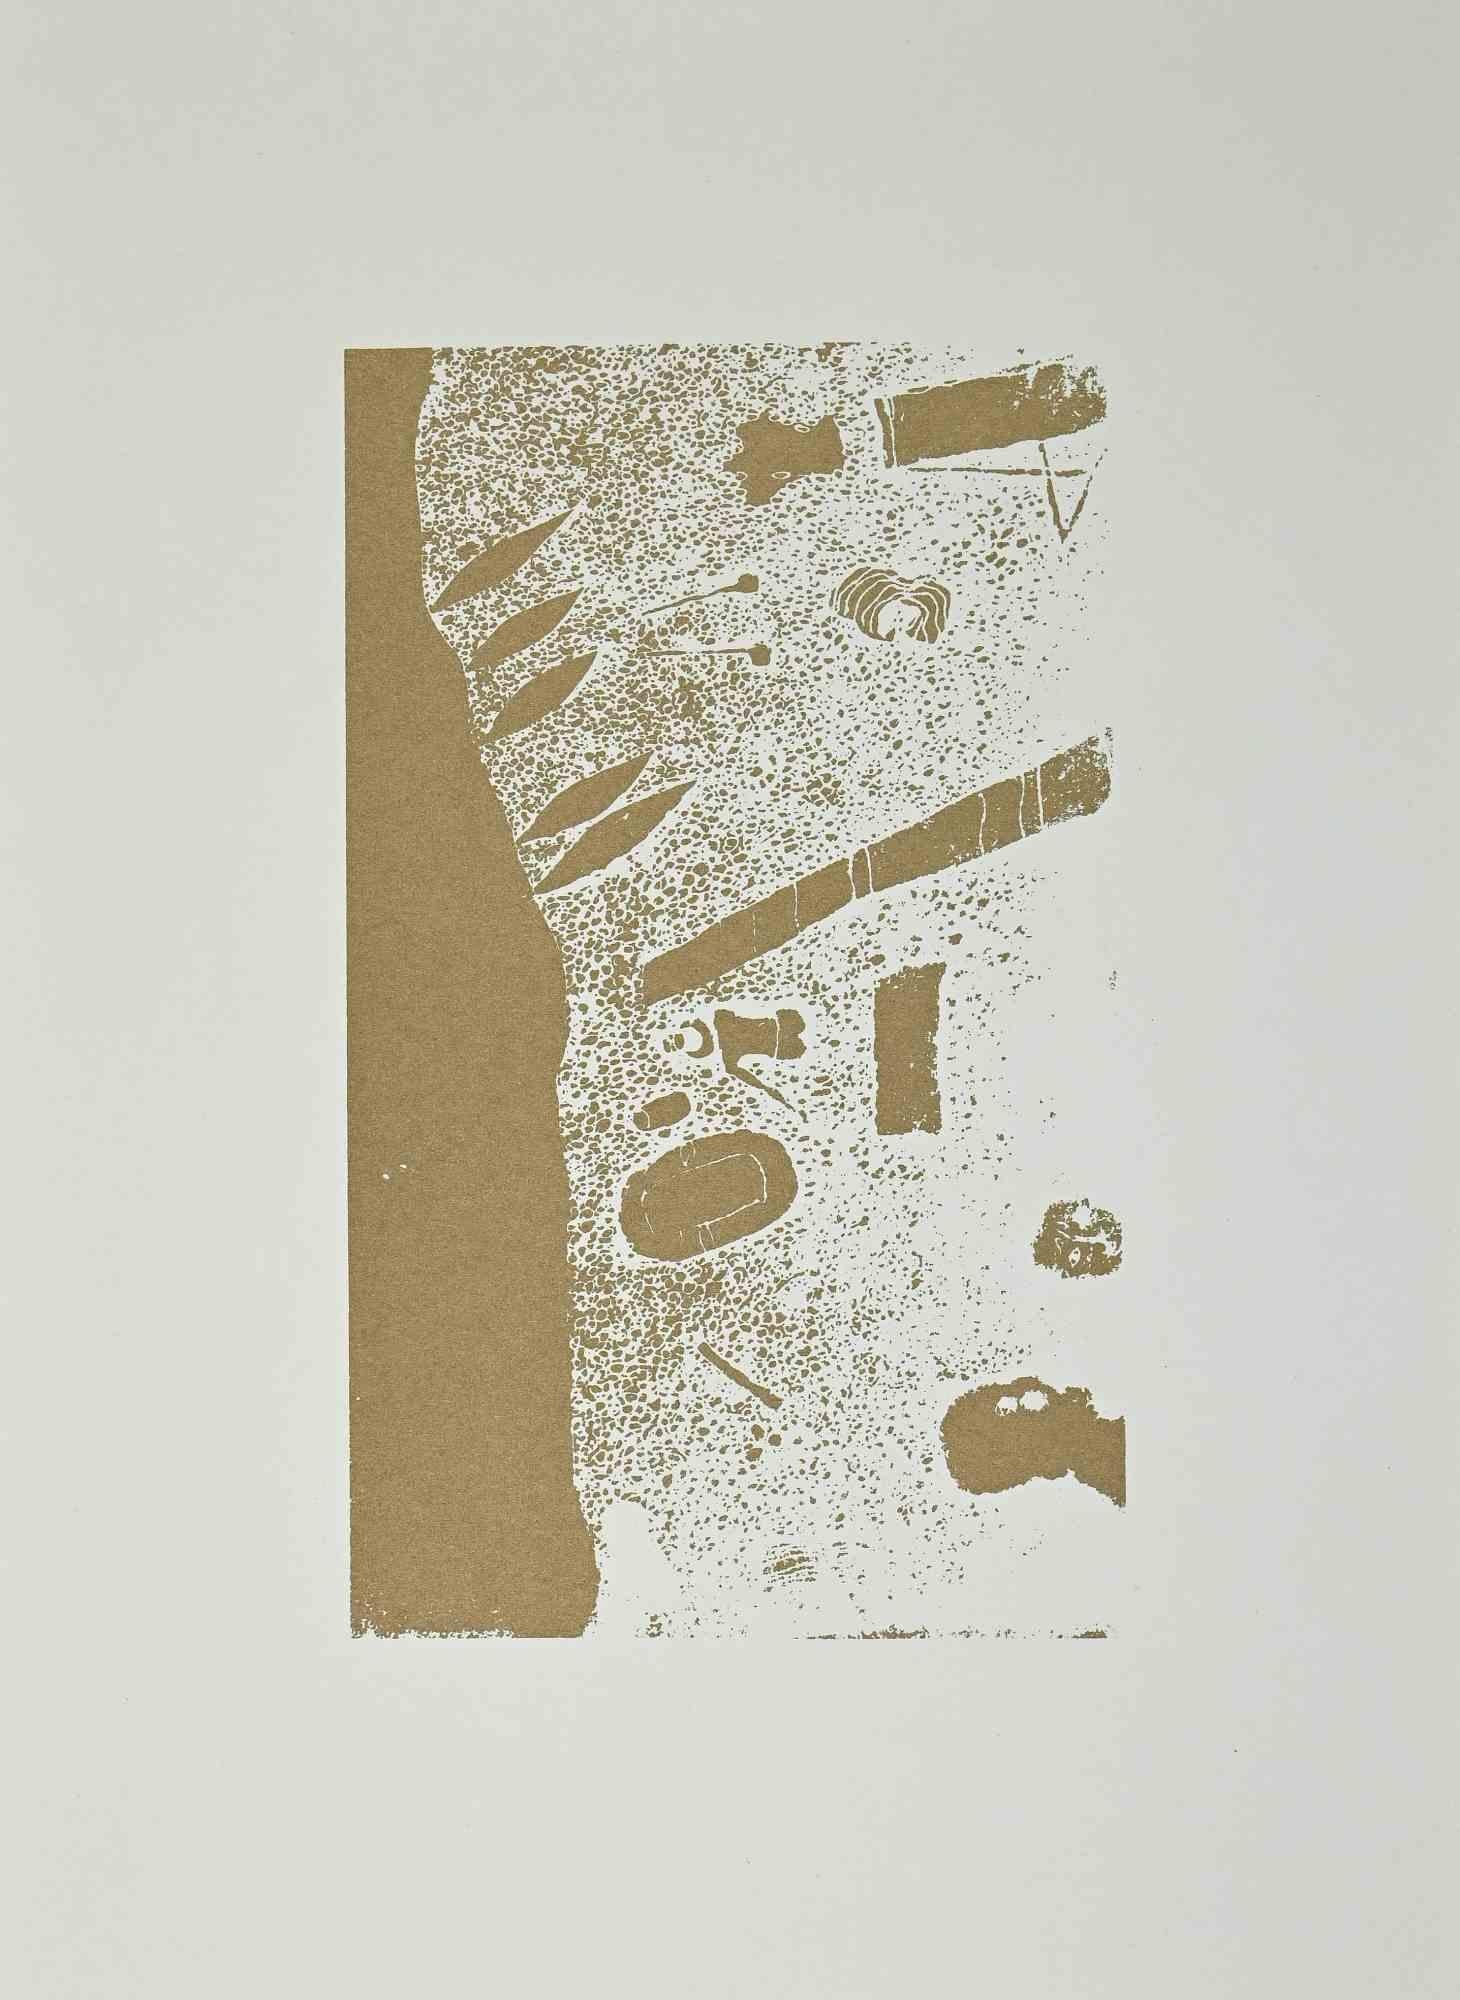 Abstract Composition is a Vintage Offset Print on ivory-colored paper, realized by Franco Gentilini (Italian Painter, 1909-1981) in the 1970s.

The state of preservation of the artwork is excellent.

Franco Gentilini ( Italian Painter, 1909-1981):